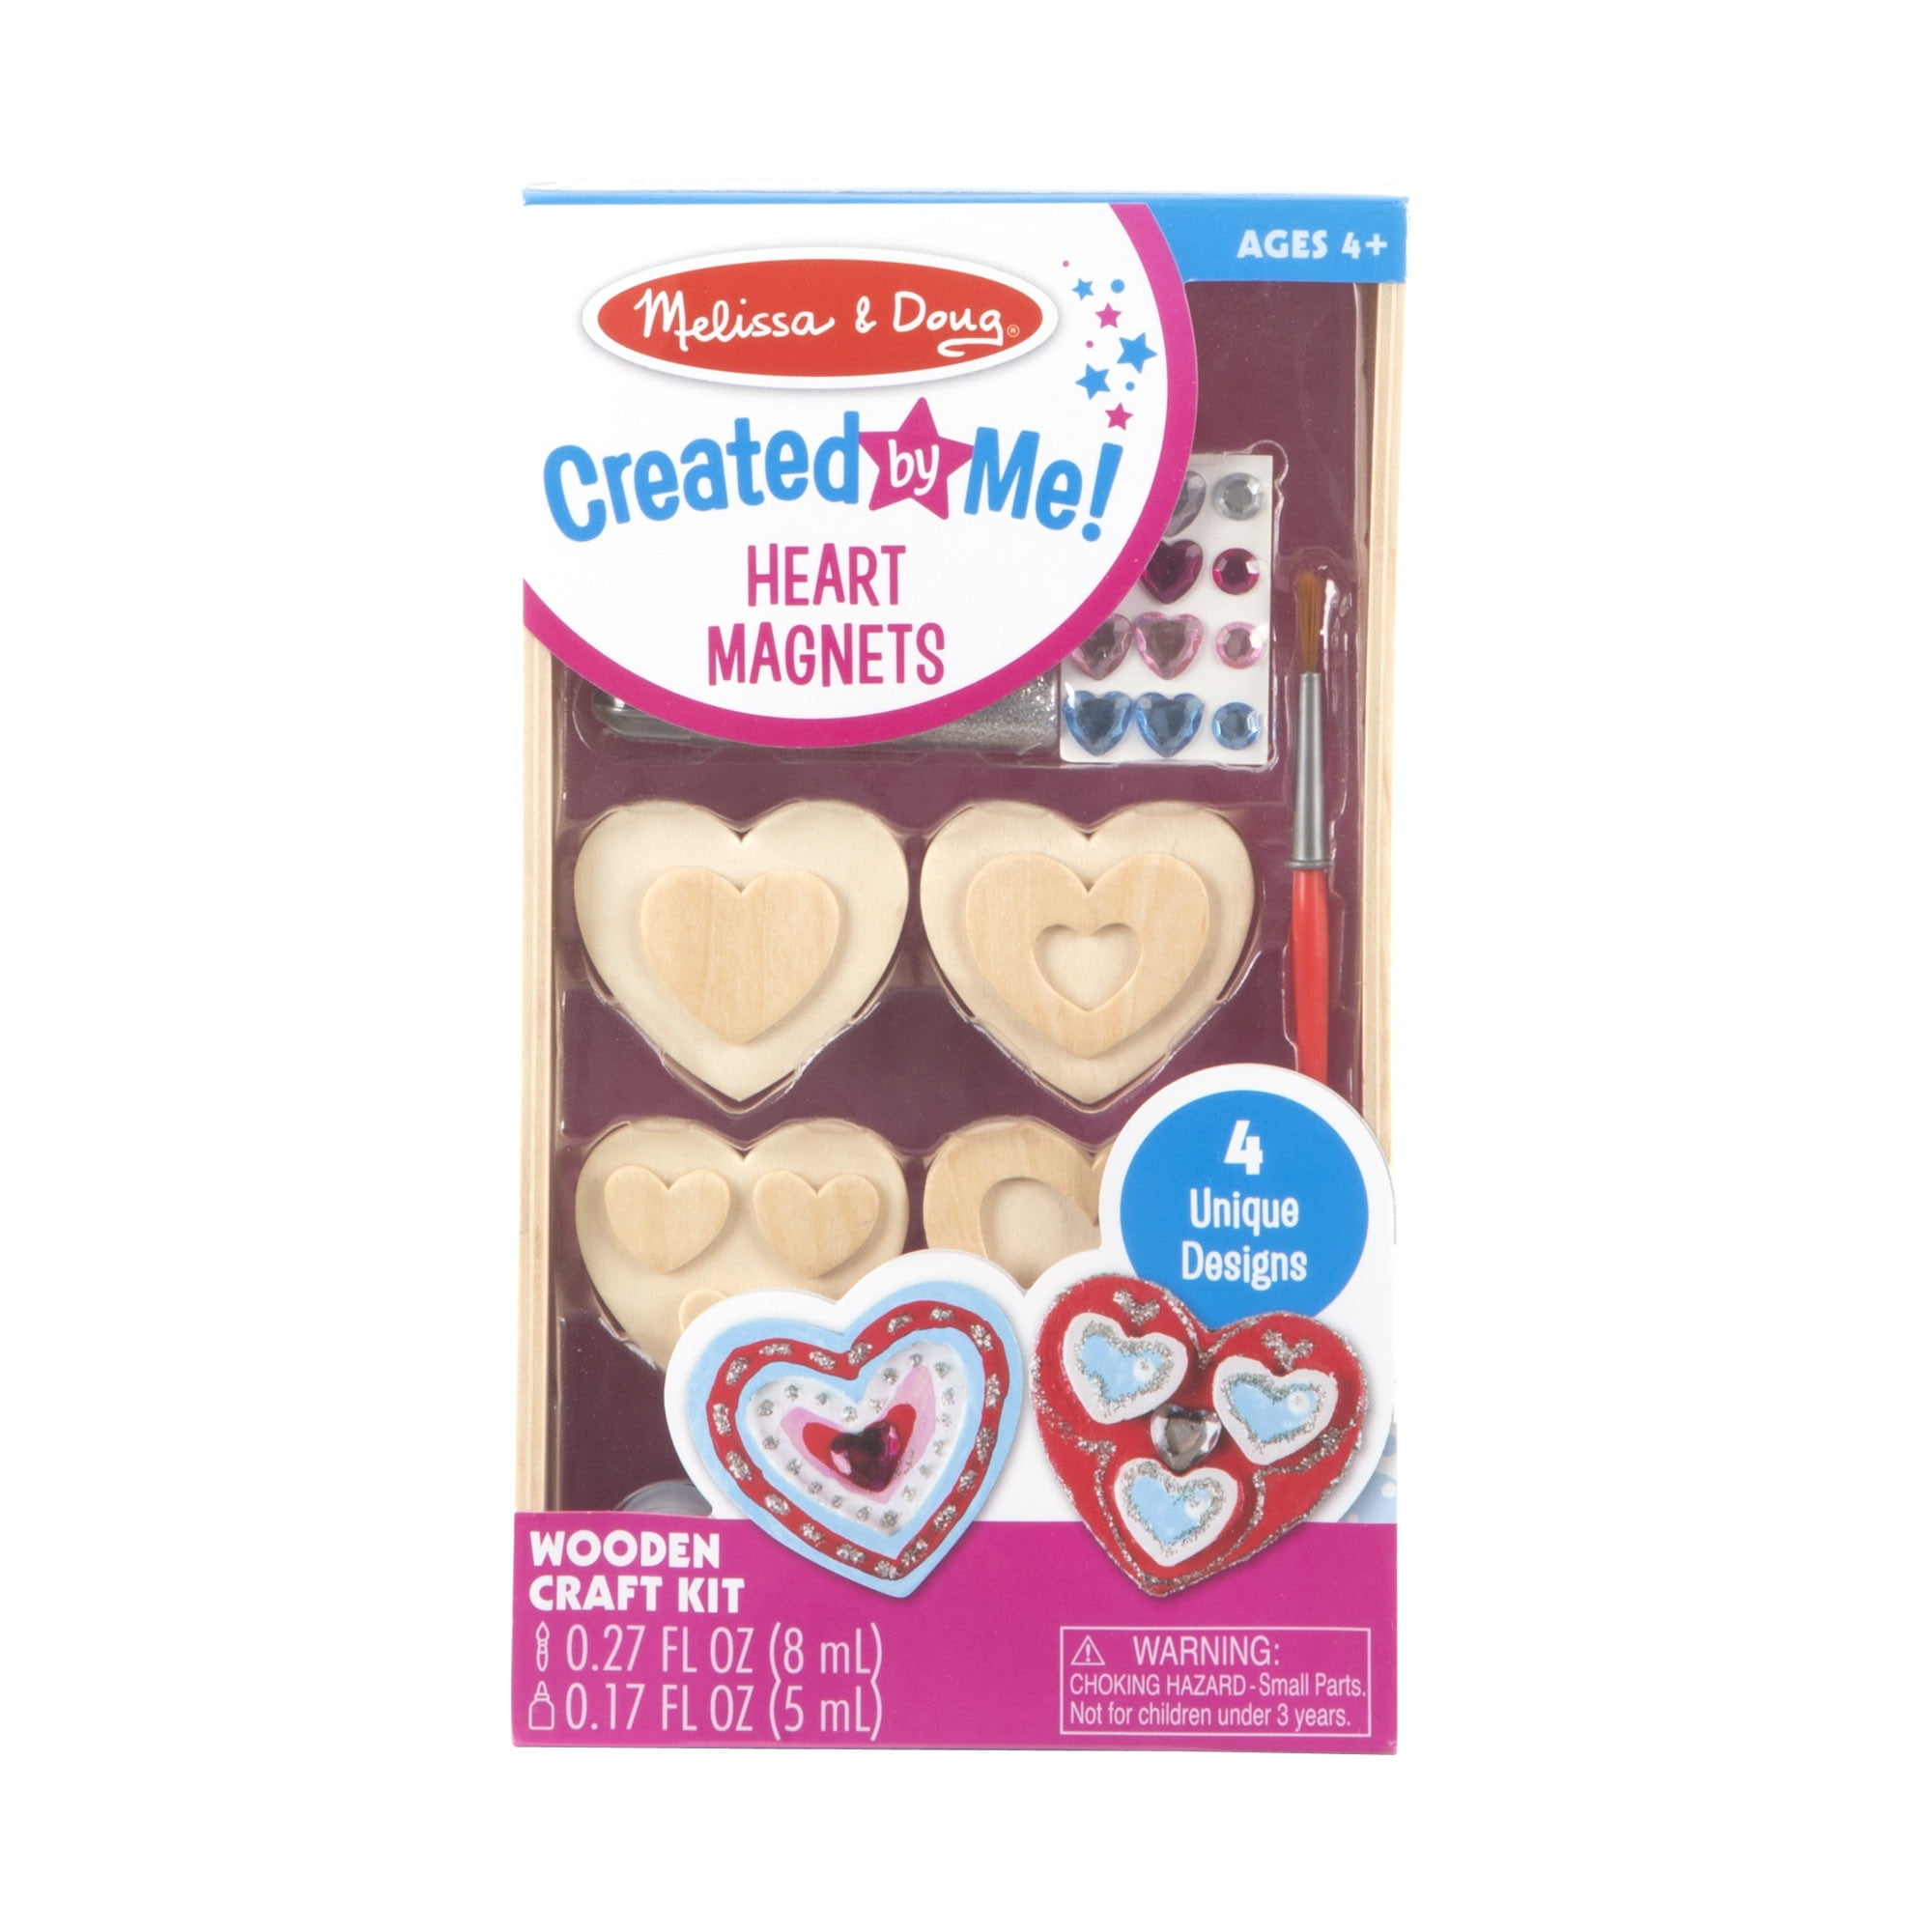 Melissa & Doug Created by Me! Wooden Heart Magnets Craft Kit (4 Designs, 4  Paints, Stickers, Glitter Glue) 8.75 x 5